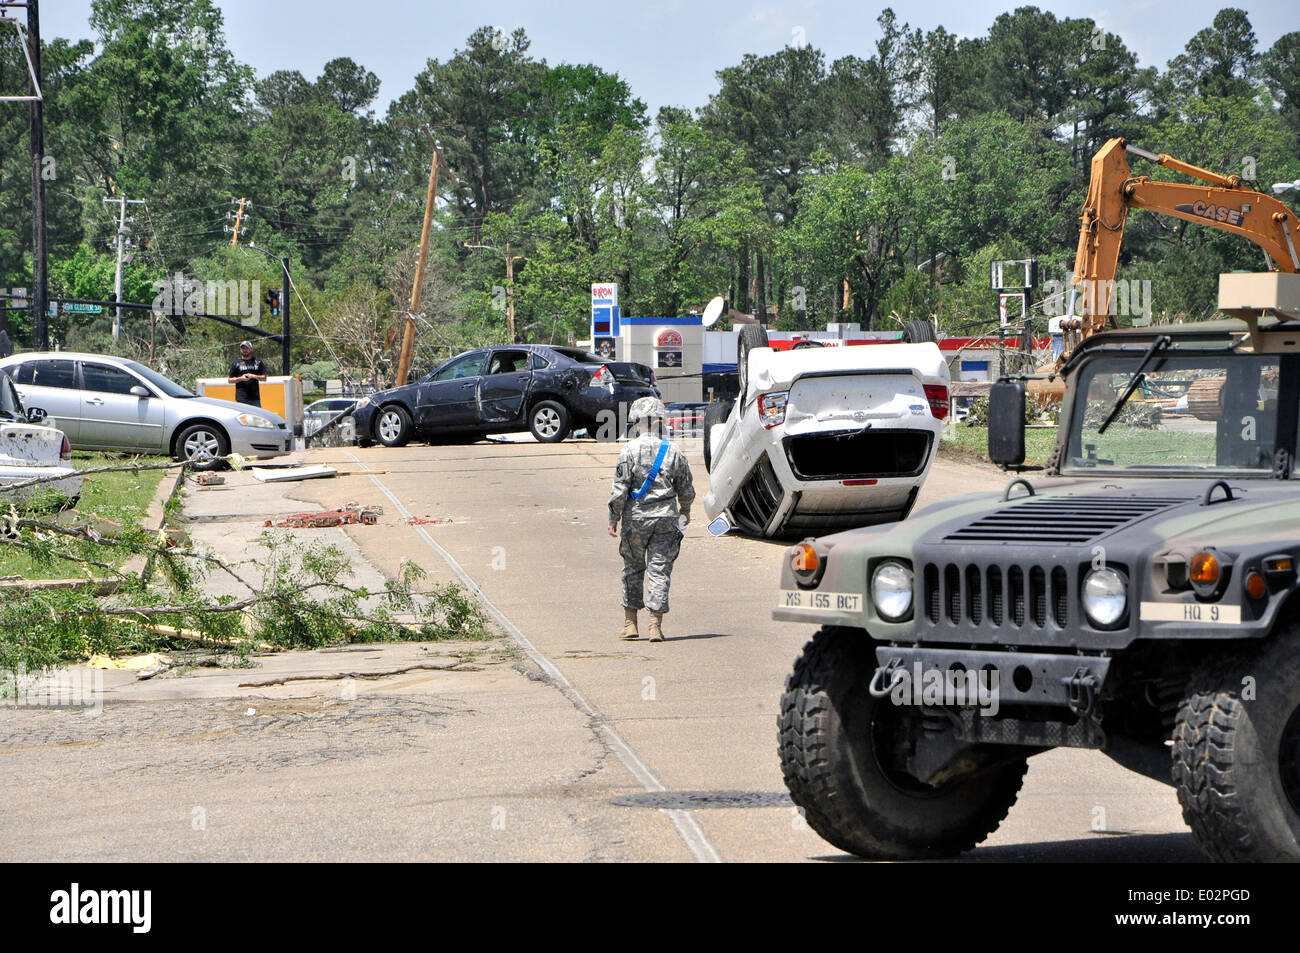 A US Army national guard soldier surveys damage on Green Street caused by tornadoes that swept across the southern states killing 35 people April 28, 2014 in Tupelo, Mississippi. Stock Photo